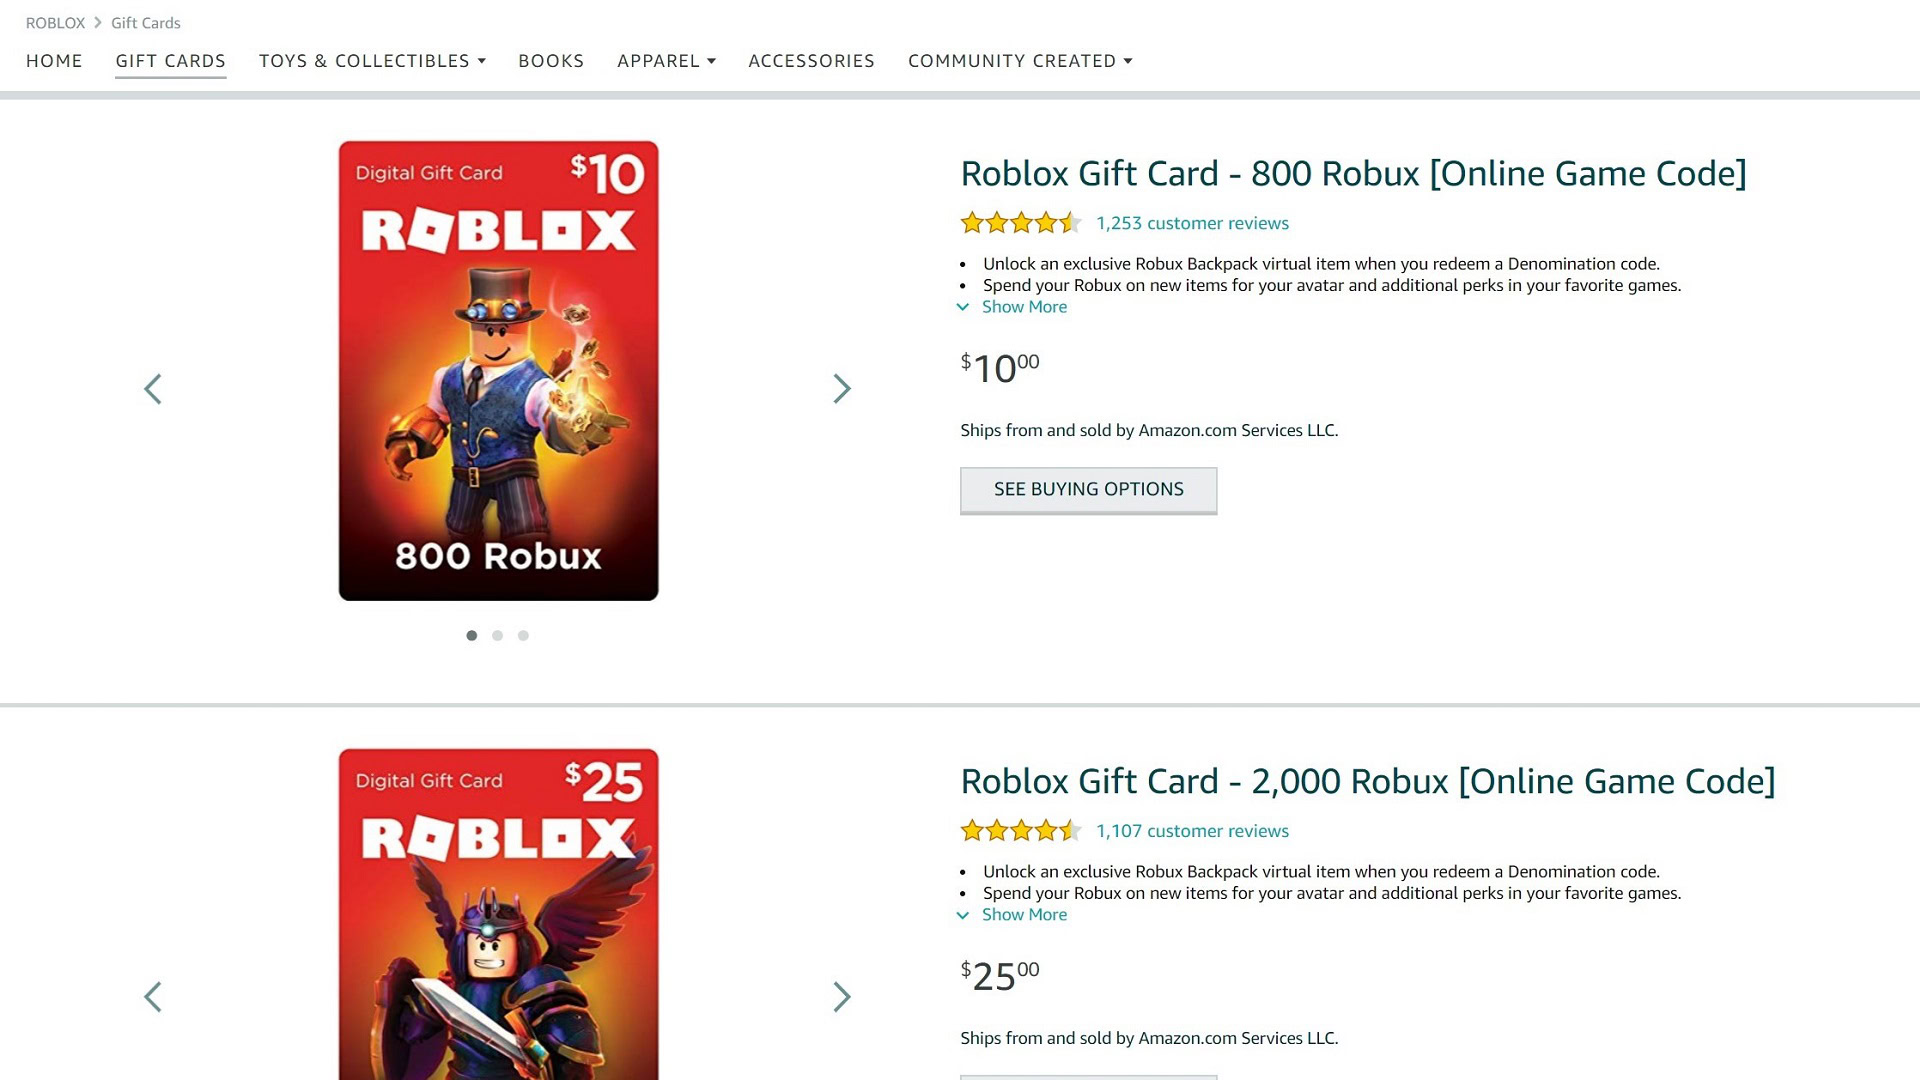 Where To Buy Roblox Gift Cards And How To Redeem Them - robux amounts and prices